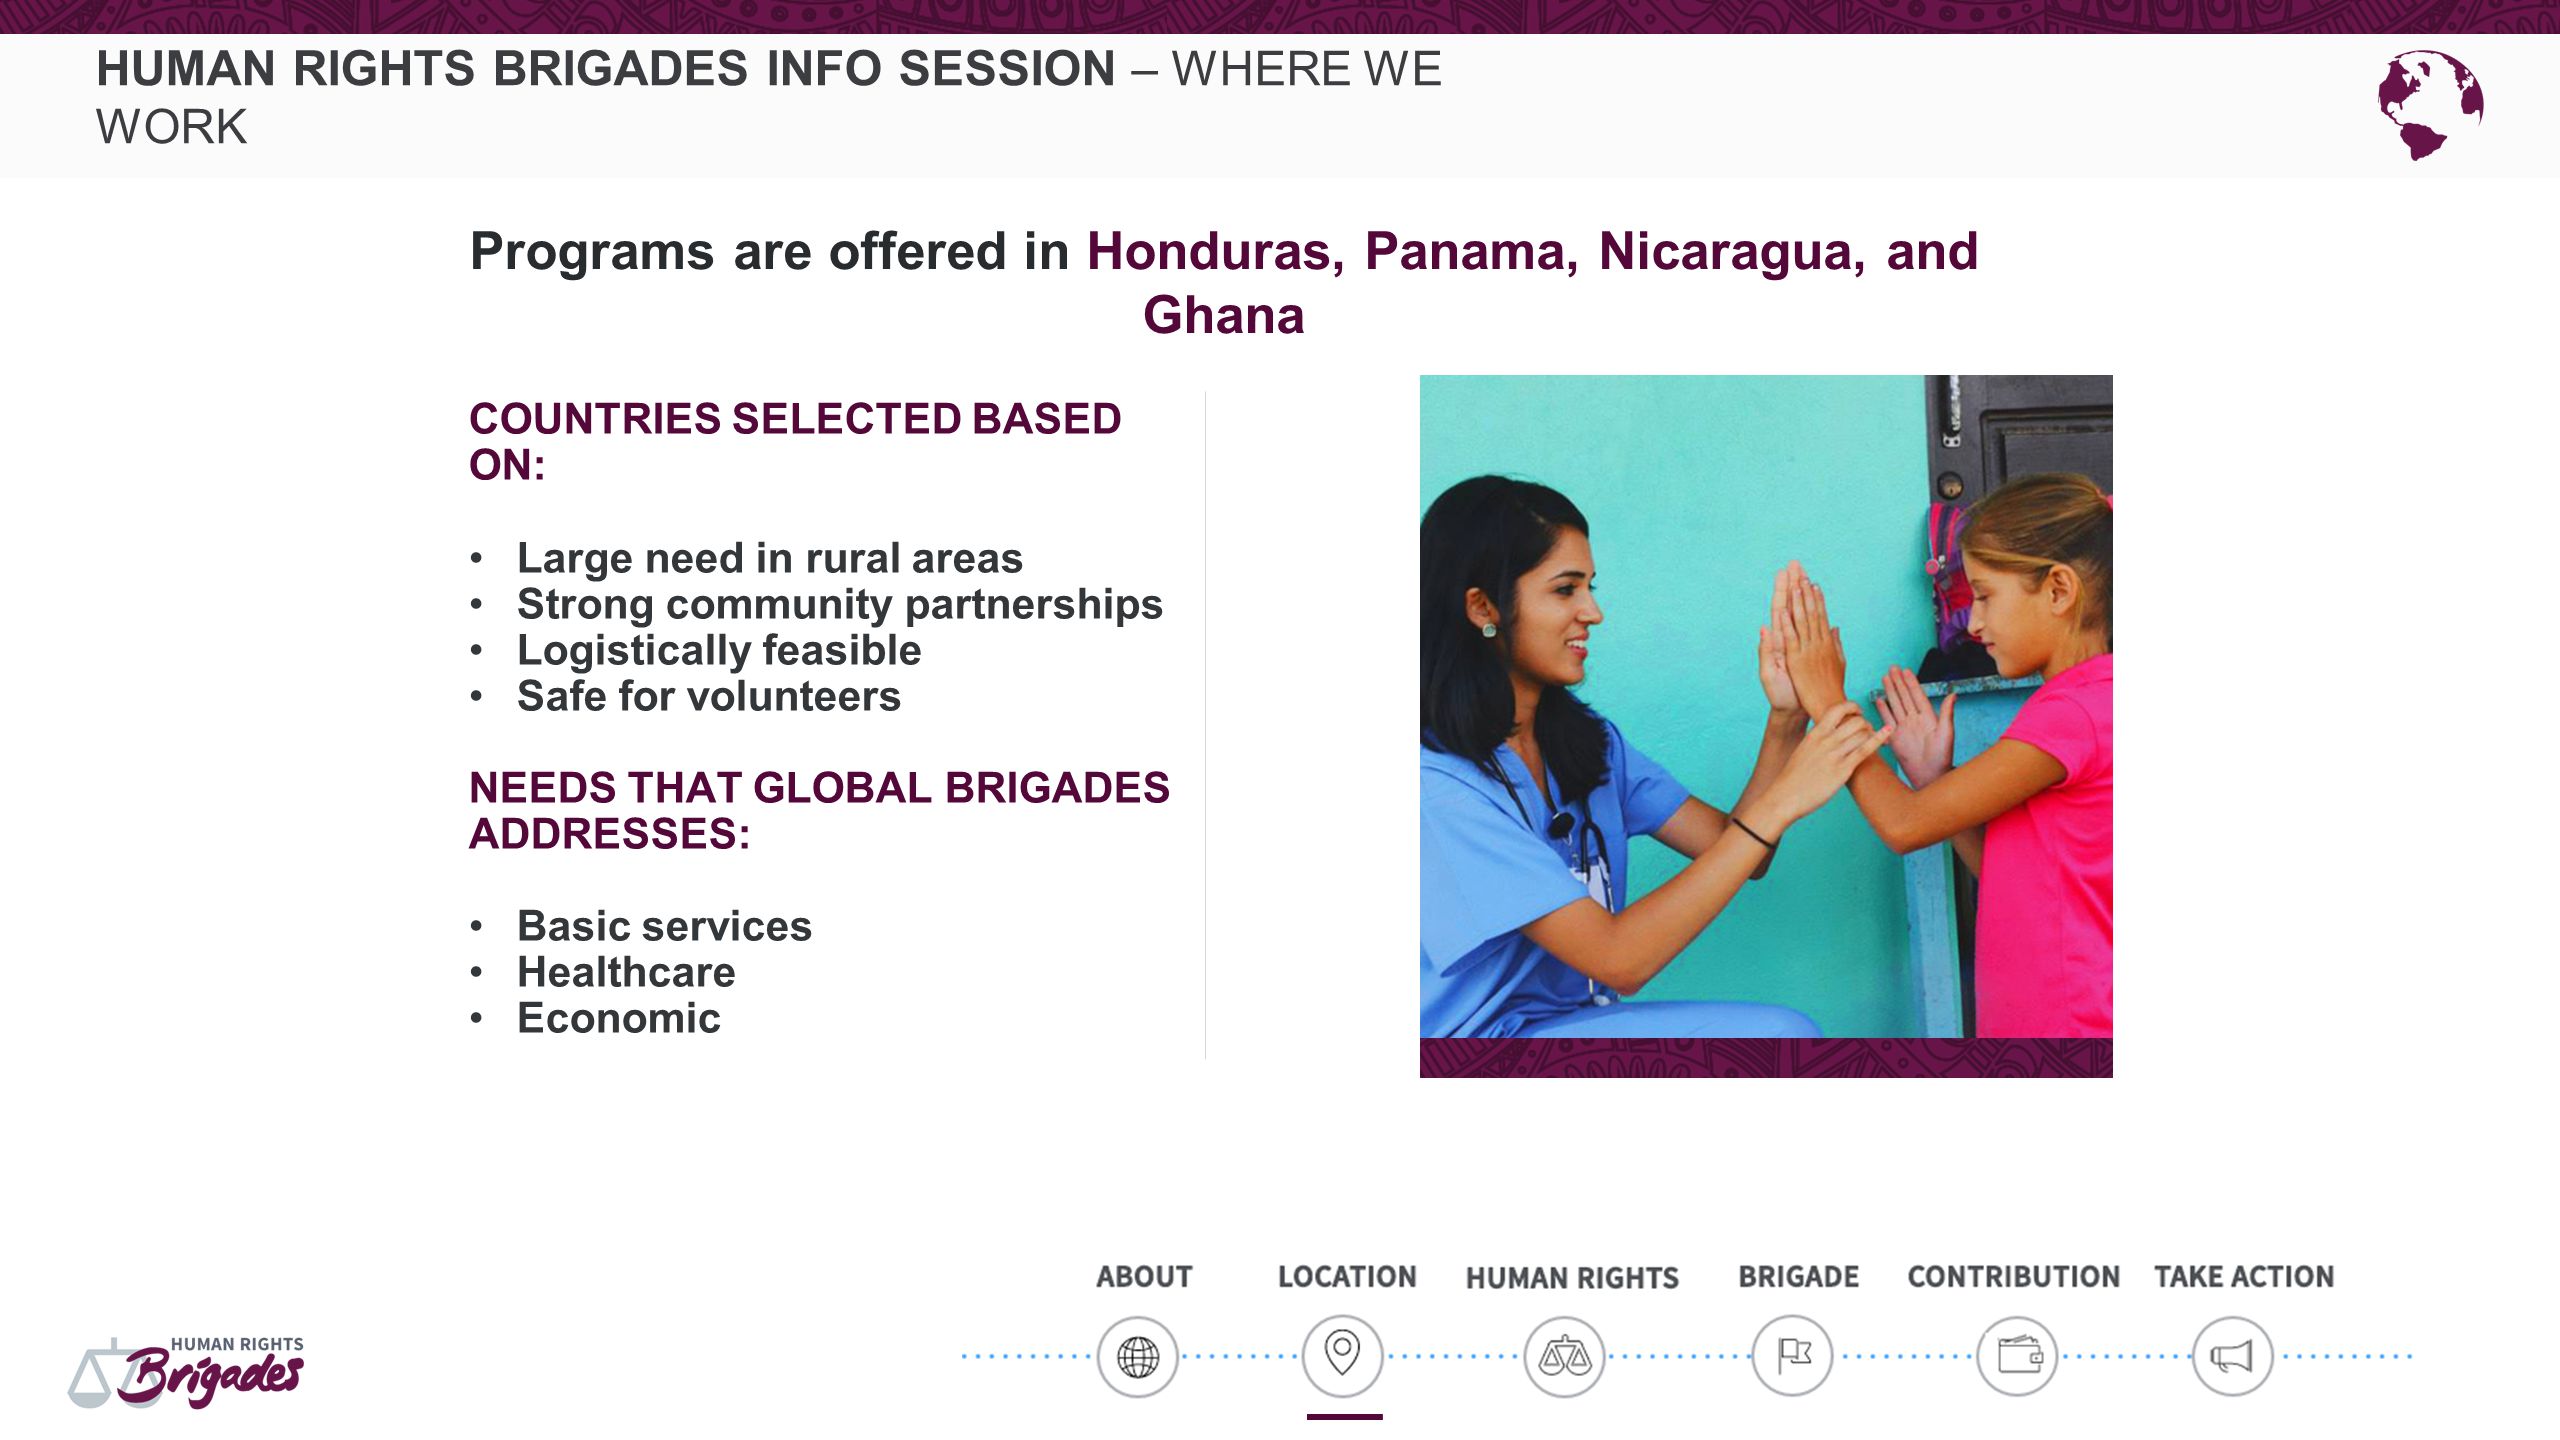 HUMAN RIGHTS BRIGADES INFO SESSION – WHERE WE WORK COUNTRIES SELECTED BASED ON: Large need in rural areas Strong community partnerships Logistically feasible Safe for volunteers NEEDS THAT GLOBAL BRIGADES ADDRESSES: Basic services Healthcare Economic Programs are offered in Honduras, Panama, Nicaragua, and Ghana